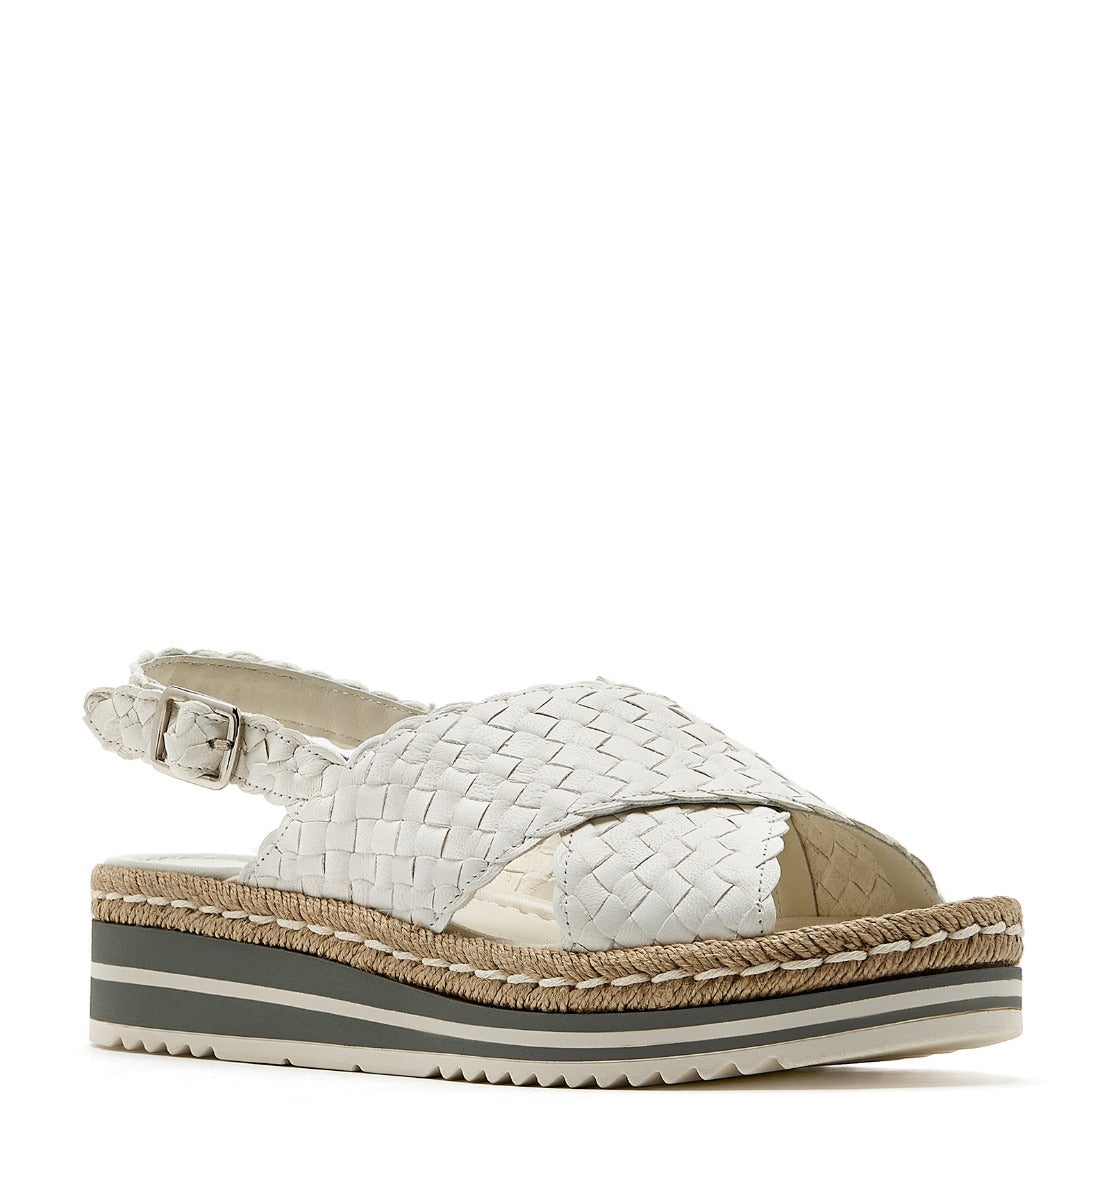 Padova Woven Leather Sandal in White